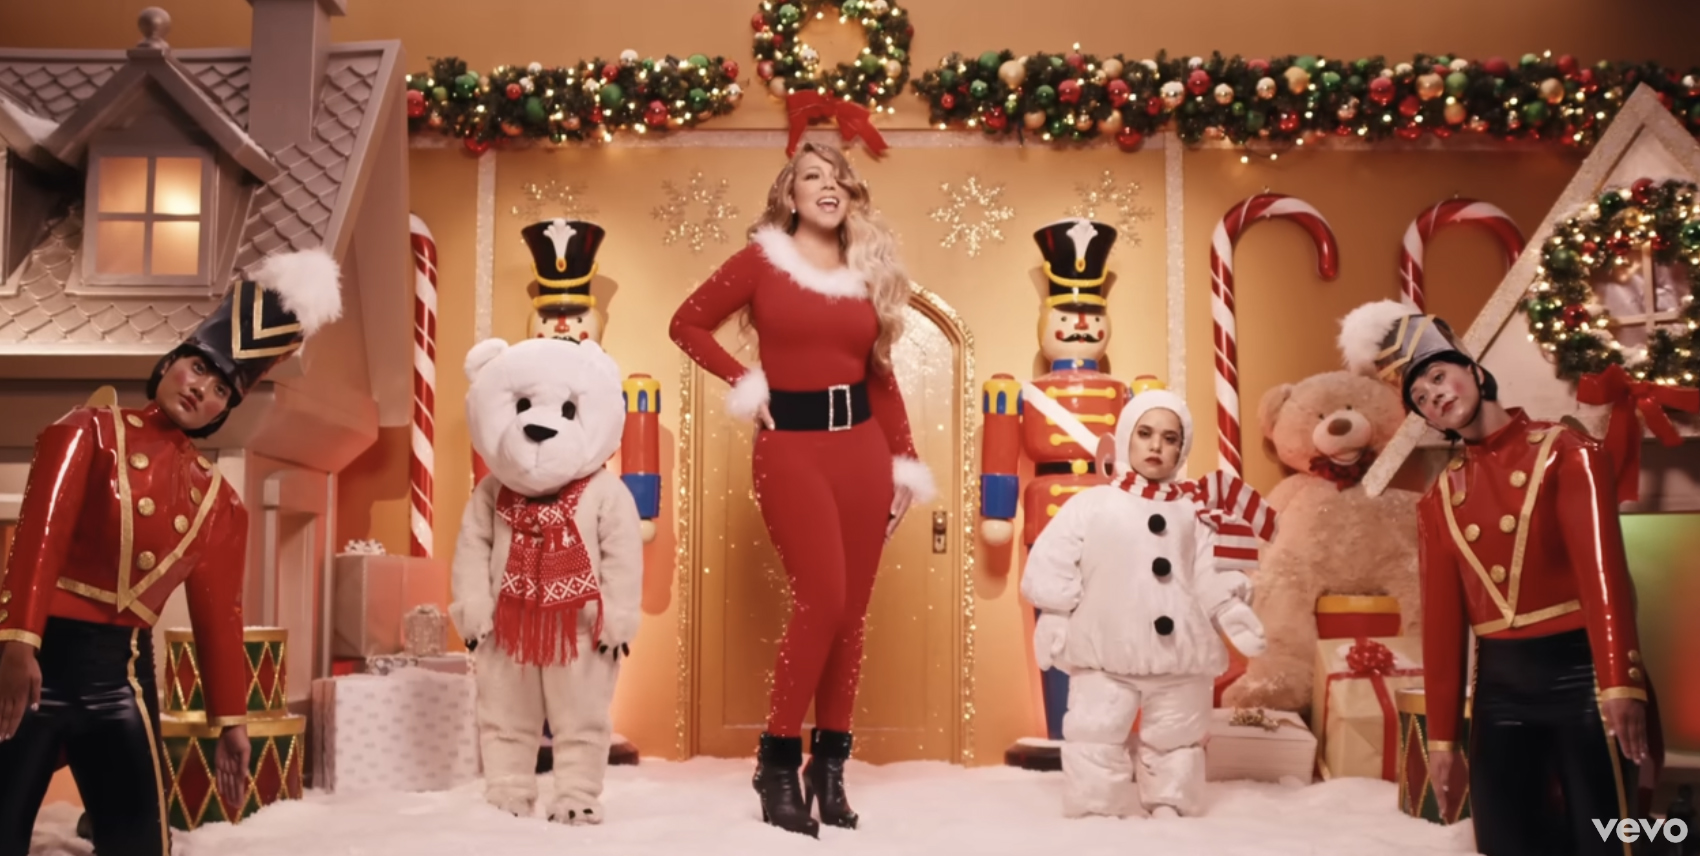 Mariah Carey performs All I Want For Christmas, a song many fans have urged her to drop